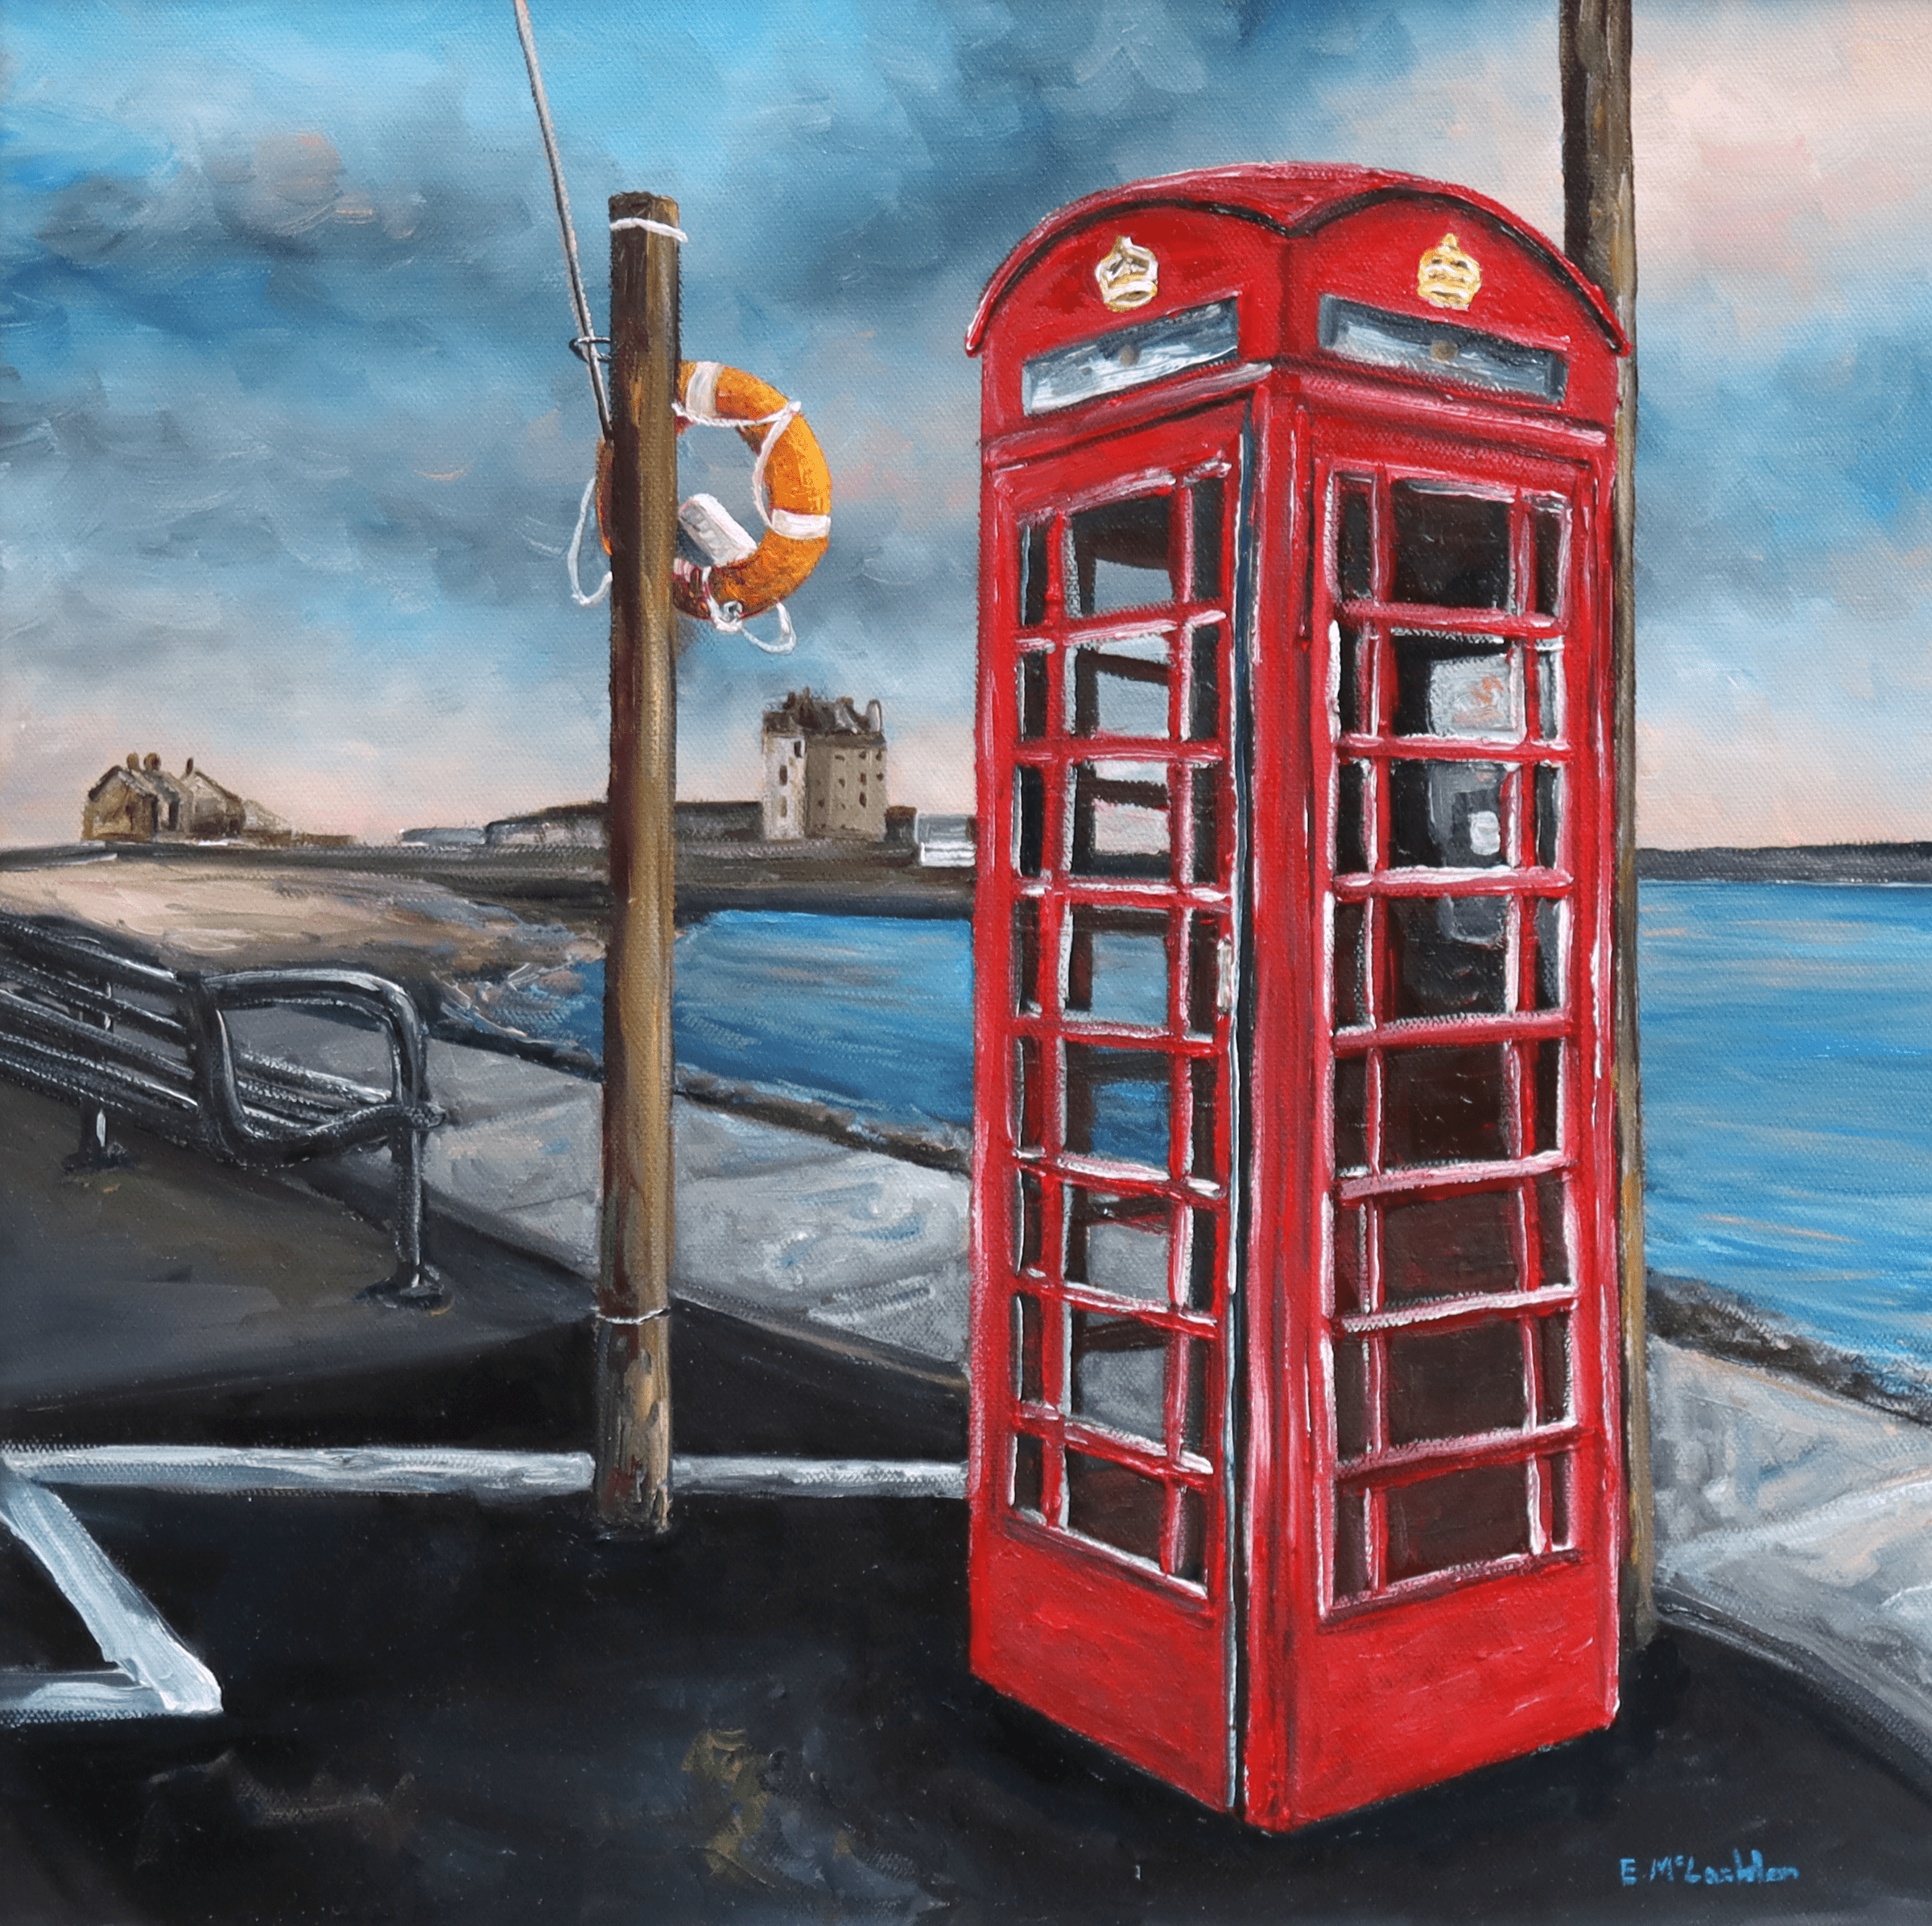 Emma_Mclachlan_The_Red_Telephone_Box_Broughty_Ferry